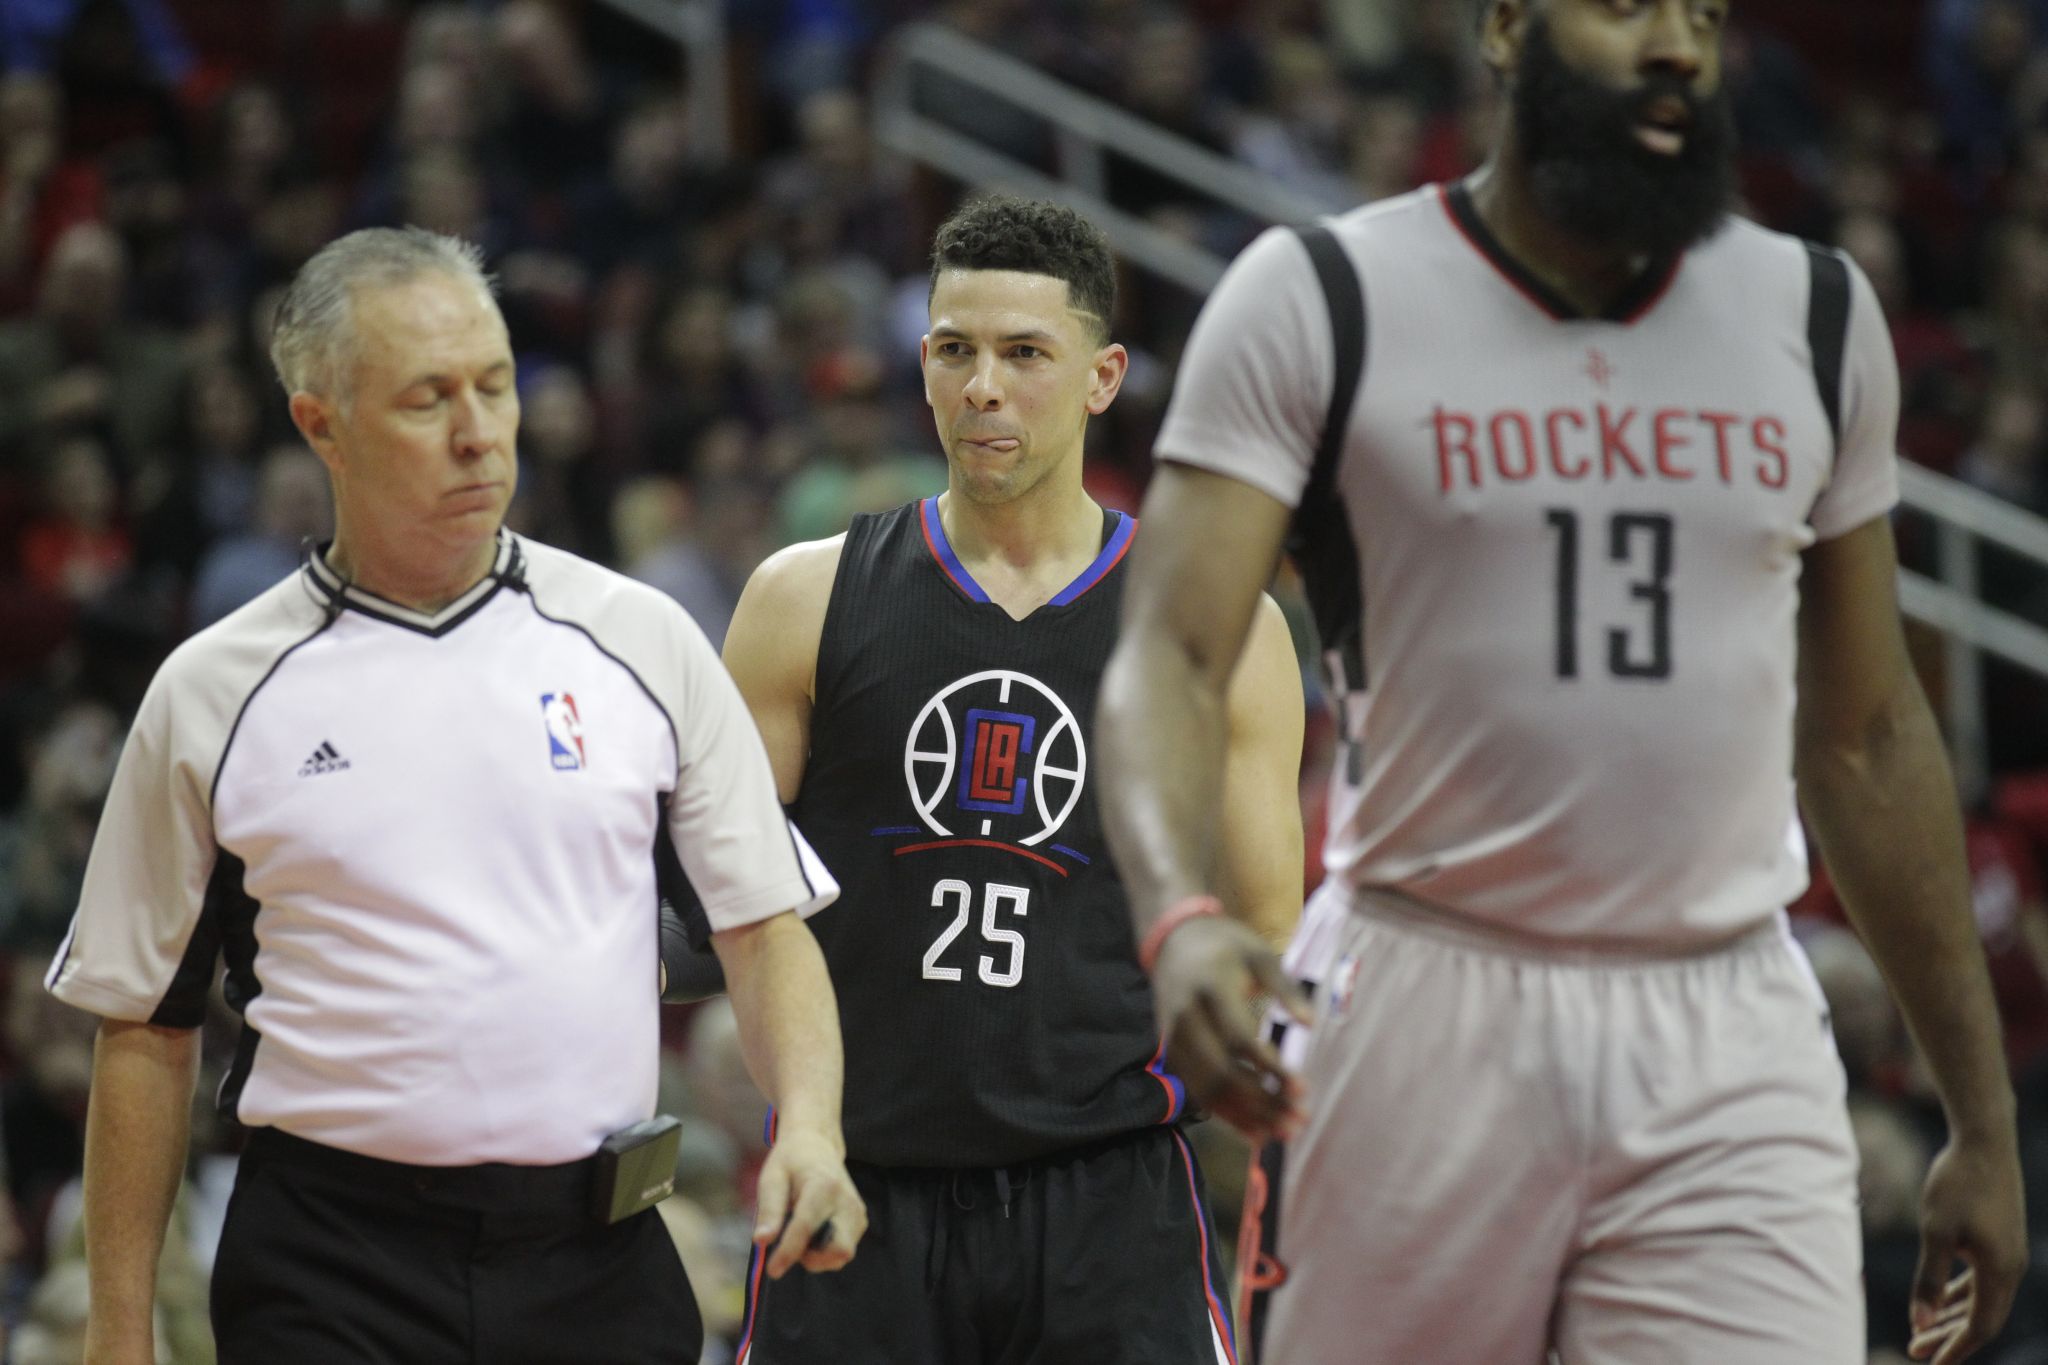 Montrezl Harrell scores career-high 30 as Clippers rout short